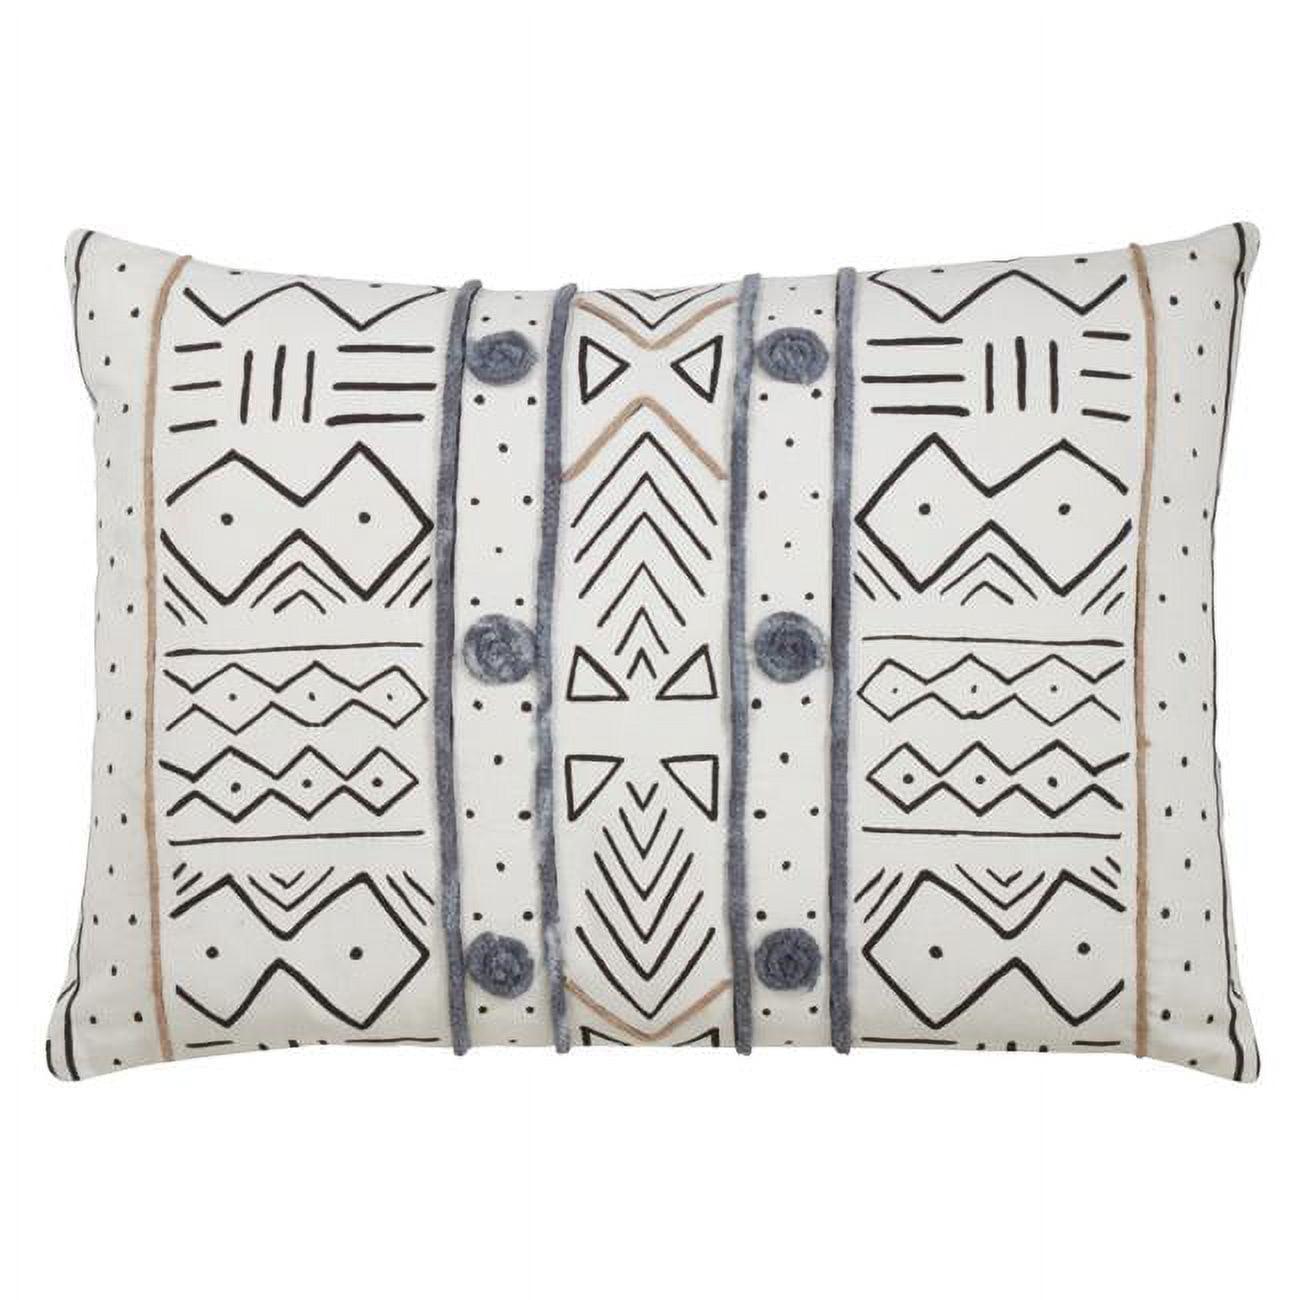 Mud Cloth Inspired Cotton Square Throw Pillow - White 14" x 20"